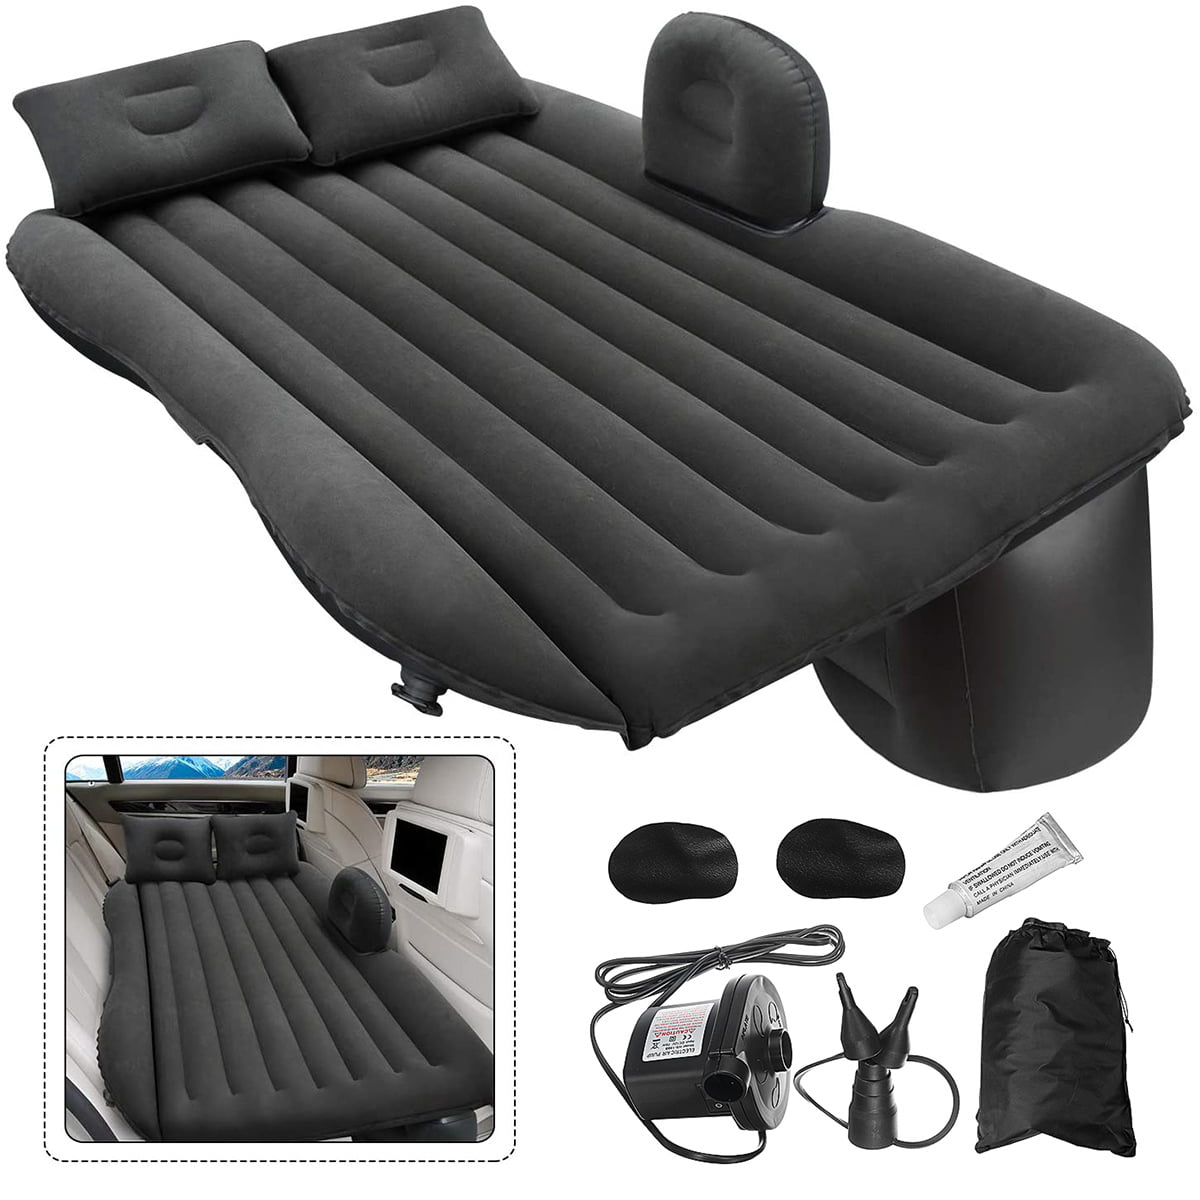 Car Inflatable Bed Back Seat Mattress Airbed Soft PVC Outing Airbed with Electrical Pump 2 Pillow and Travelling Bag Camping Airbed Cushion for Napping On Car After Work Fit Sedan SUV and Mini Van 